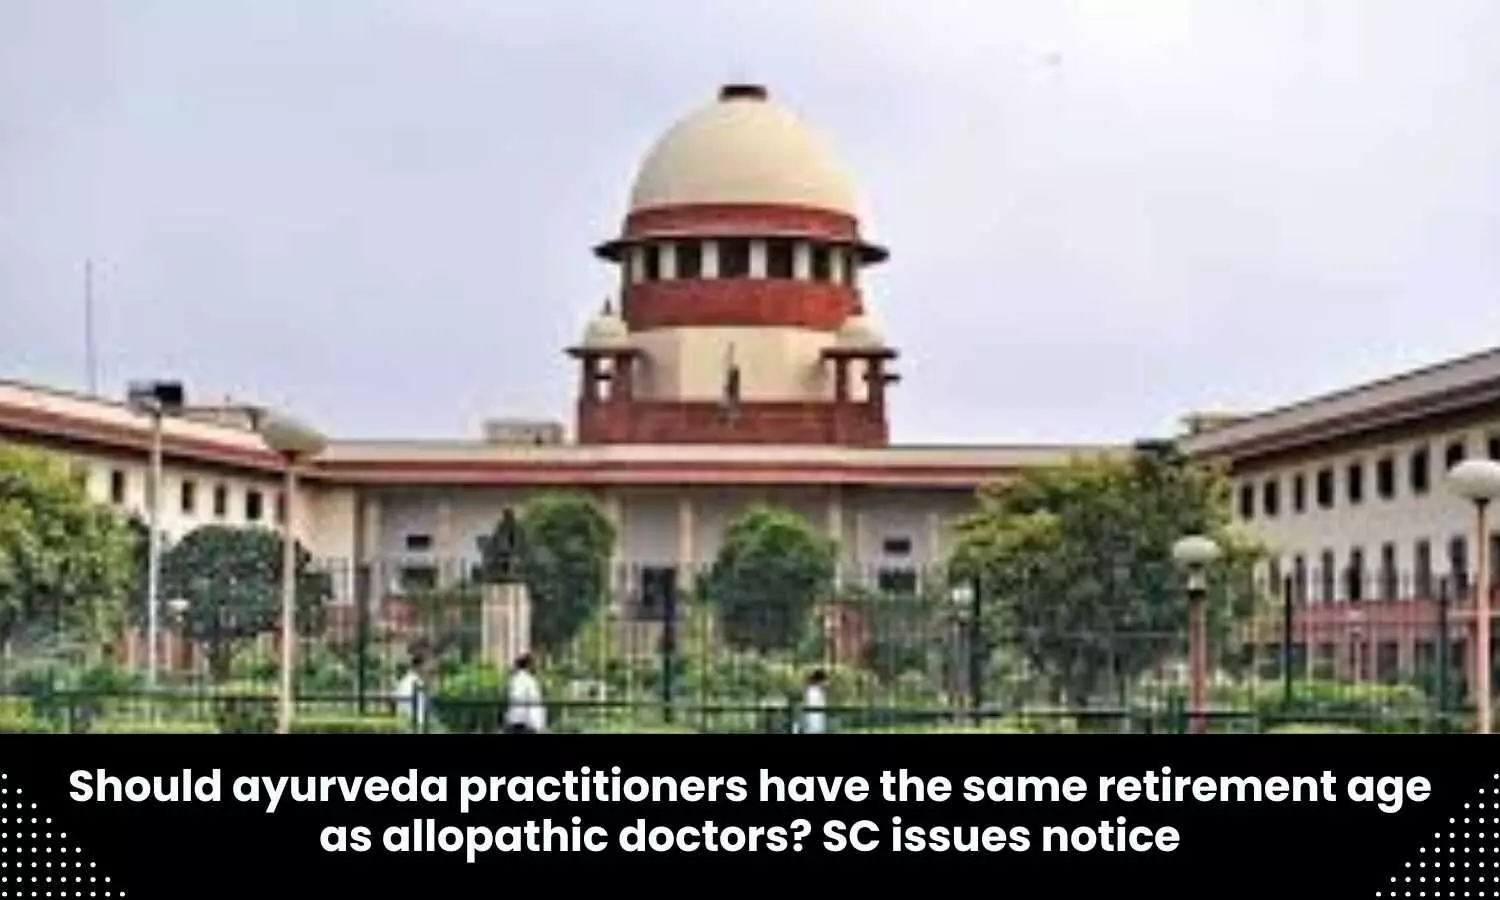 Should ayurveda practitioners have the same retirement age as allopathic doctors? Supreme Court issues notice